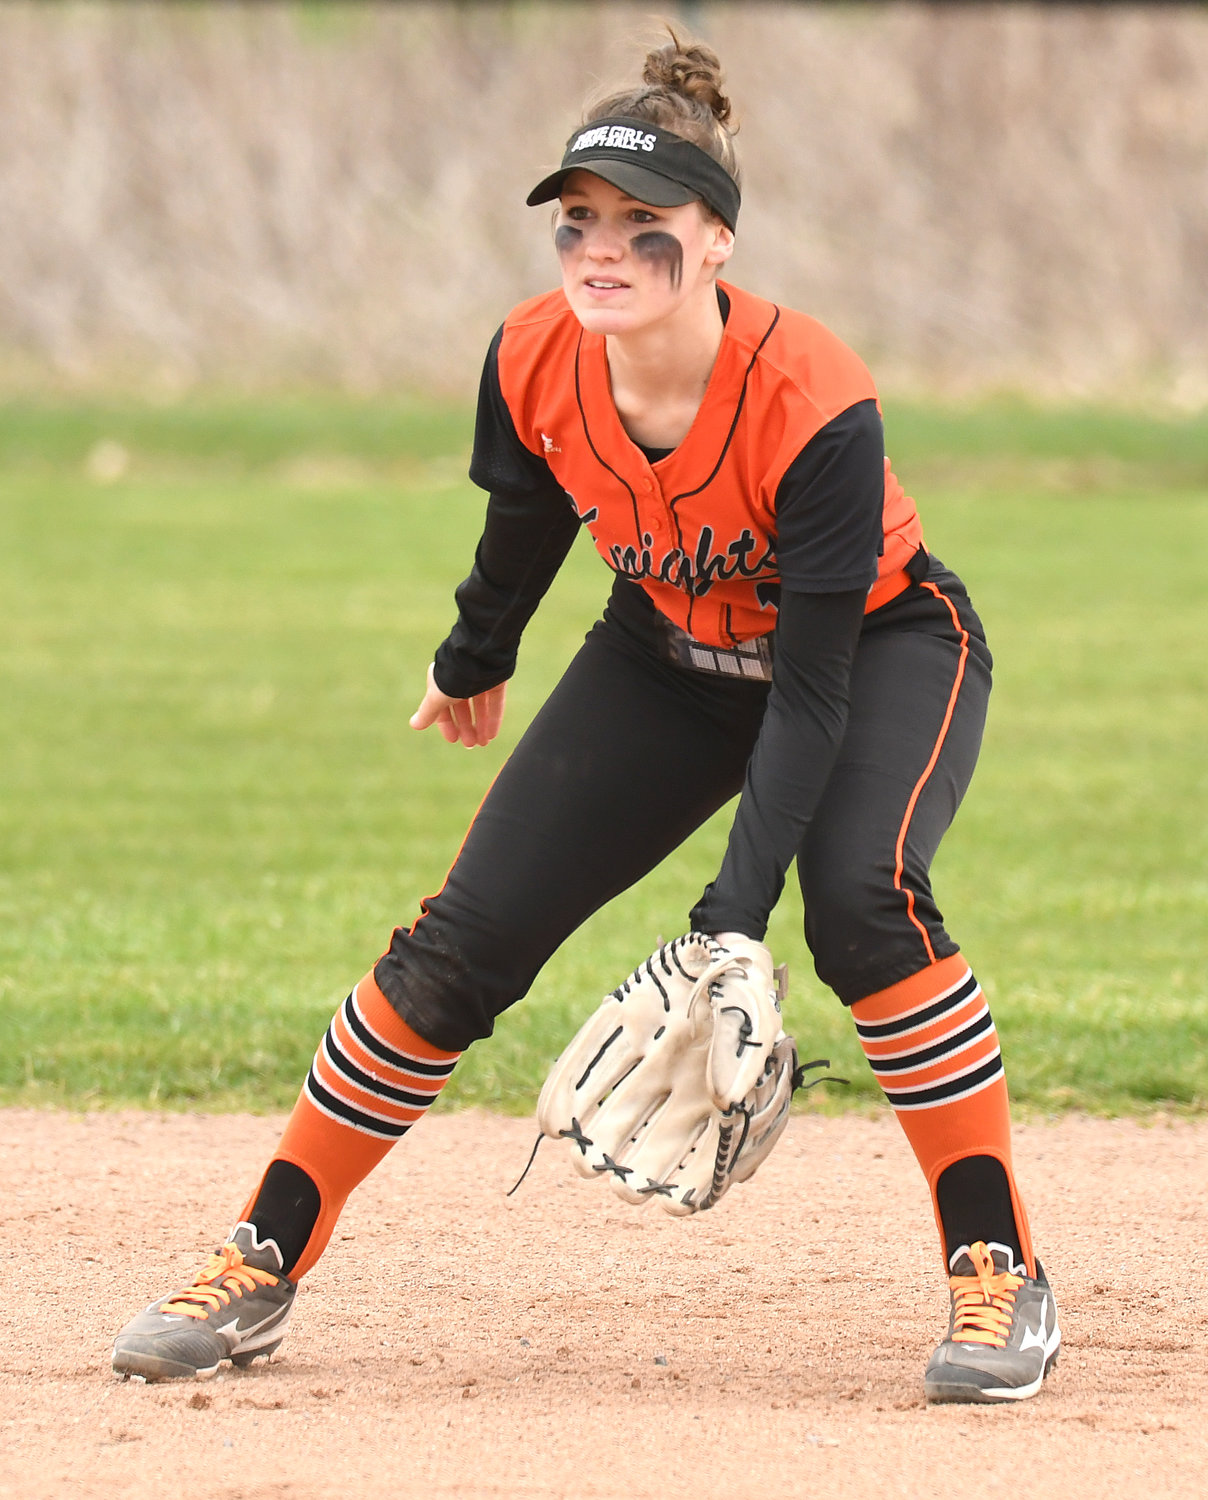 Rome Free Academy senior shortstop Maggie Closinski awaits a pitch in this file photo for earlier this season. Closinski is a co-captain and hits in the middle of the Black Knights’ lineup.